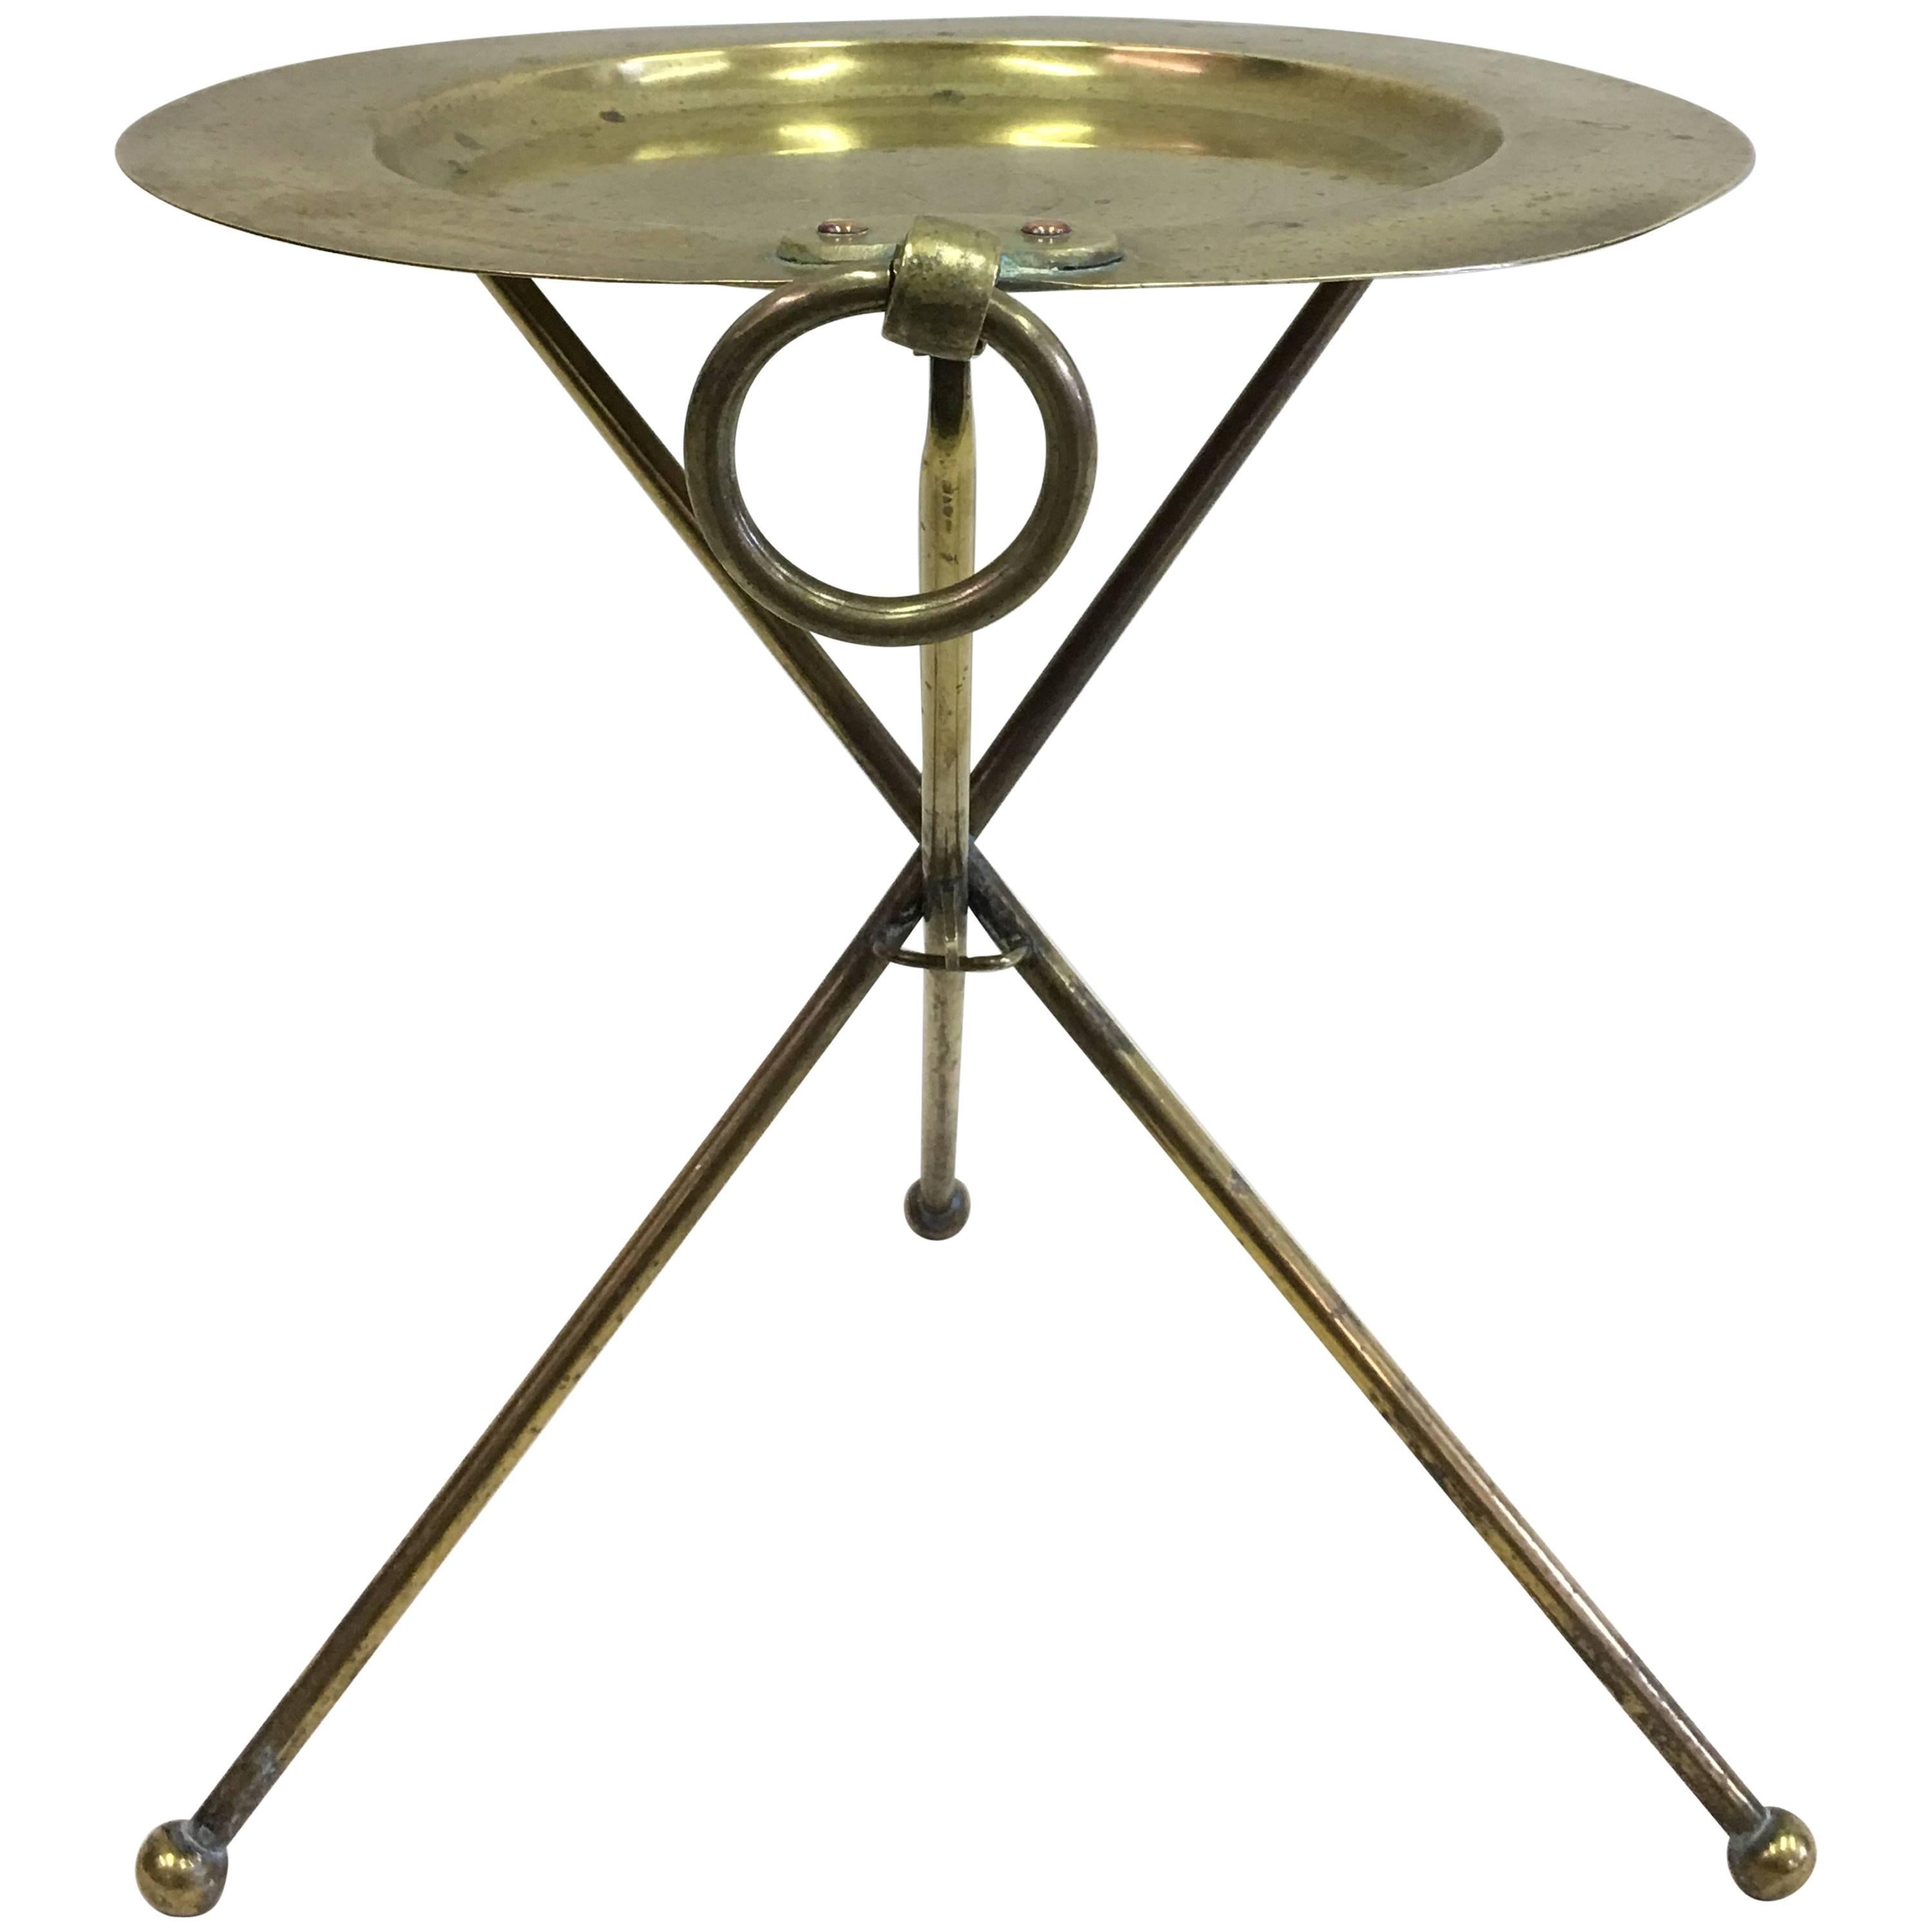 French Mid-Century Modern Neoclassical Solid Brass Guéridon or Side Table